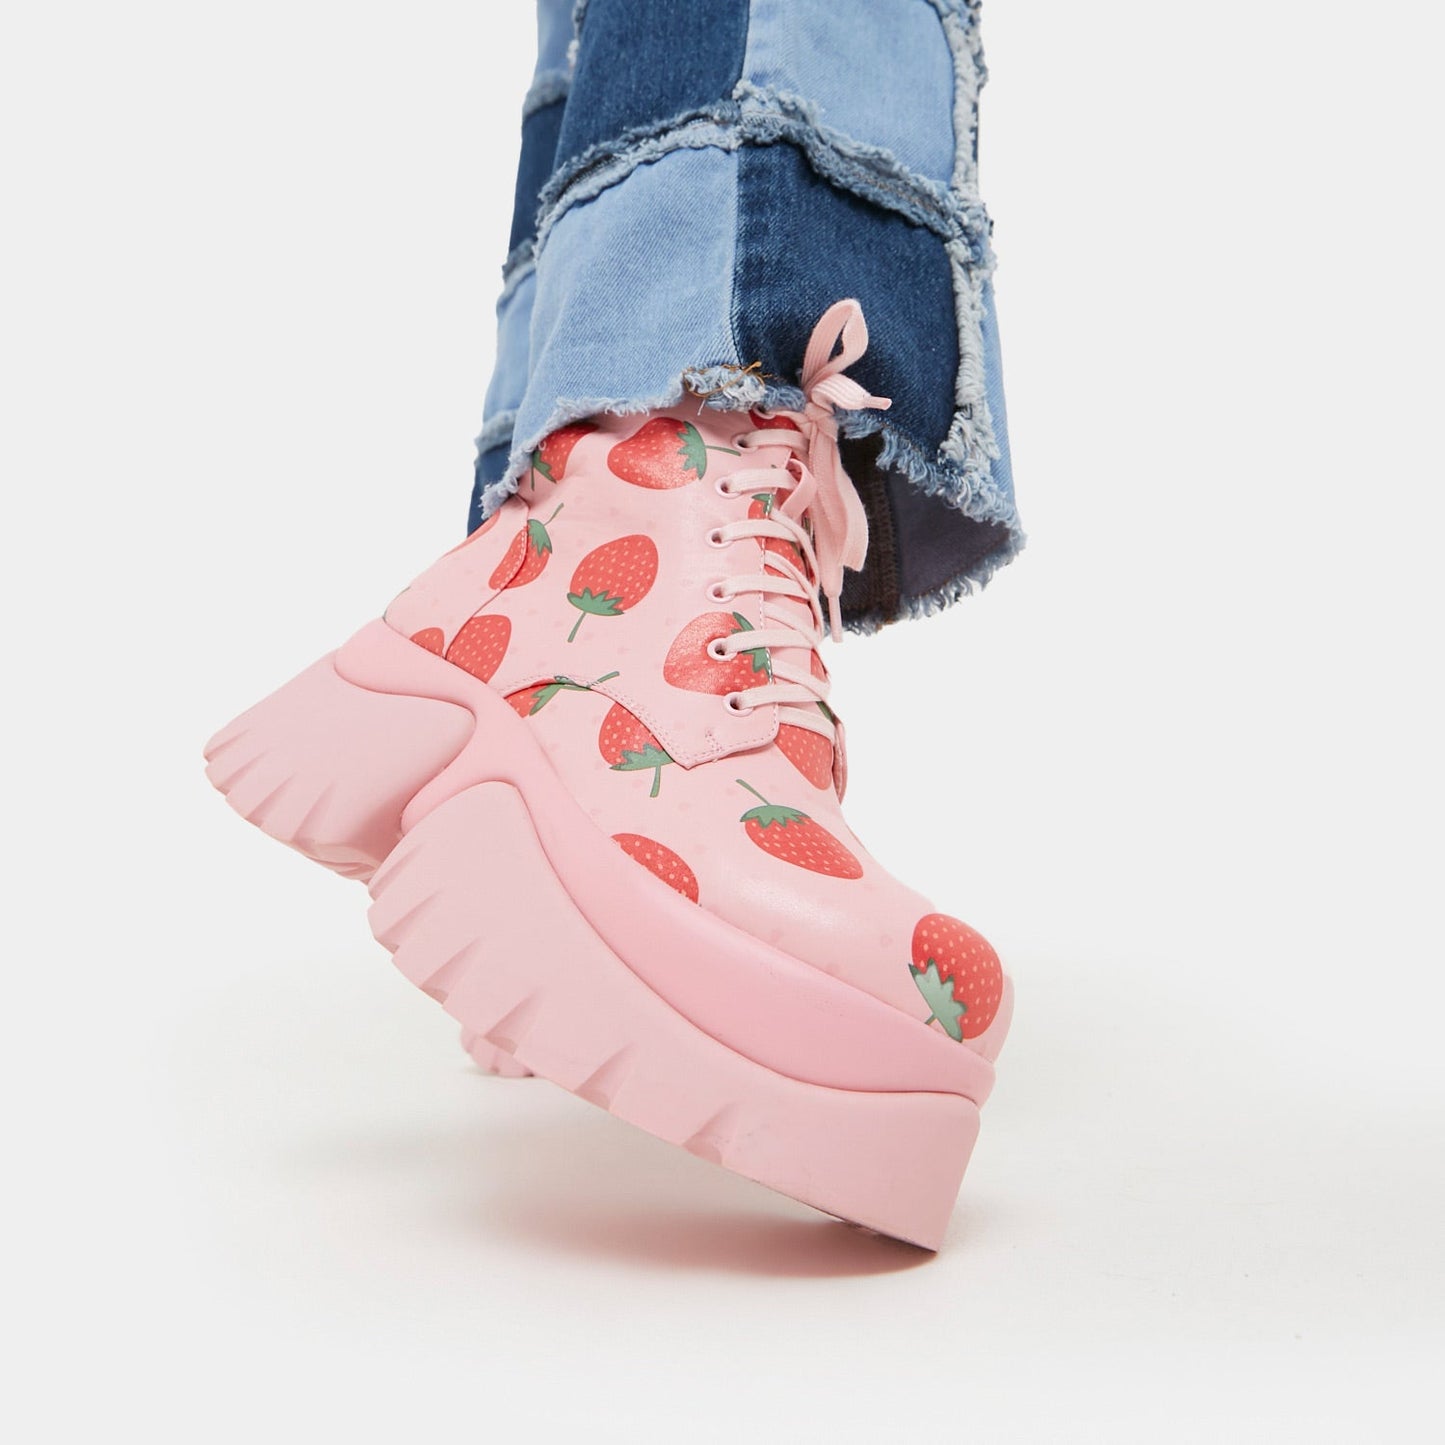 Strawberry Shortcake Pink Vilun Boots - Ankle Boots - KOI Footwear - Pink - Model Detail